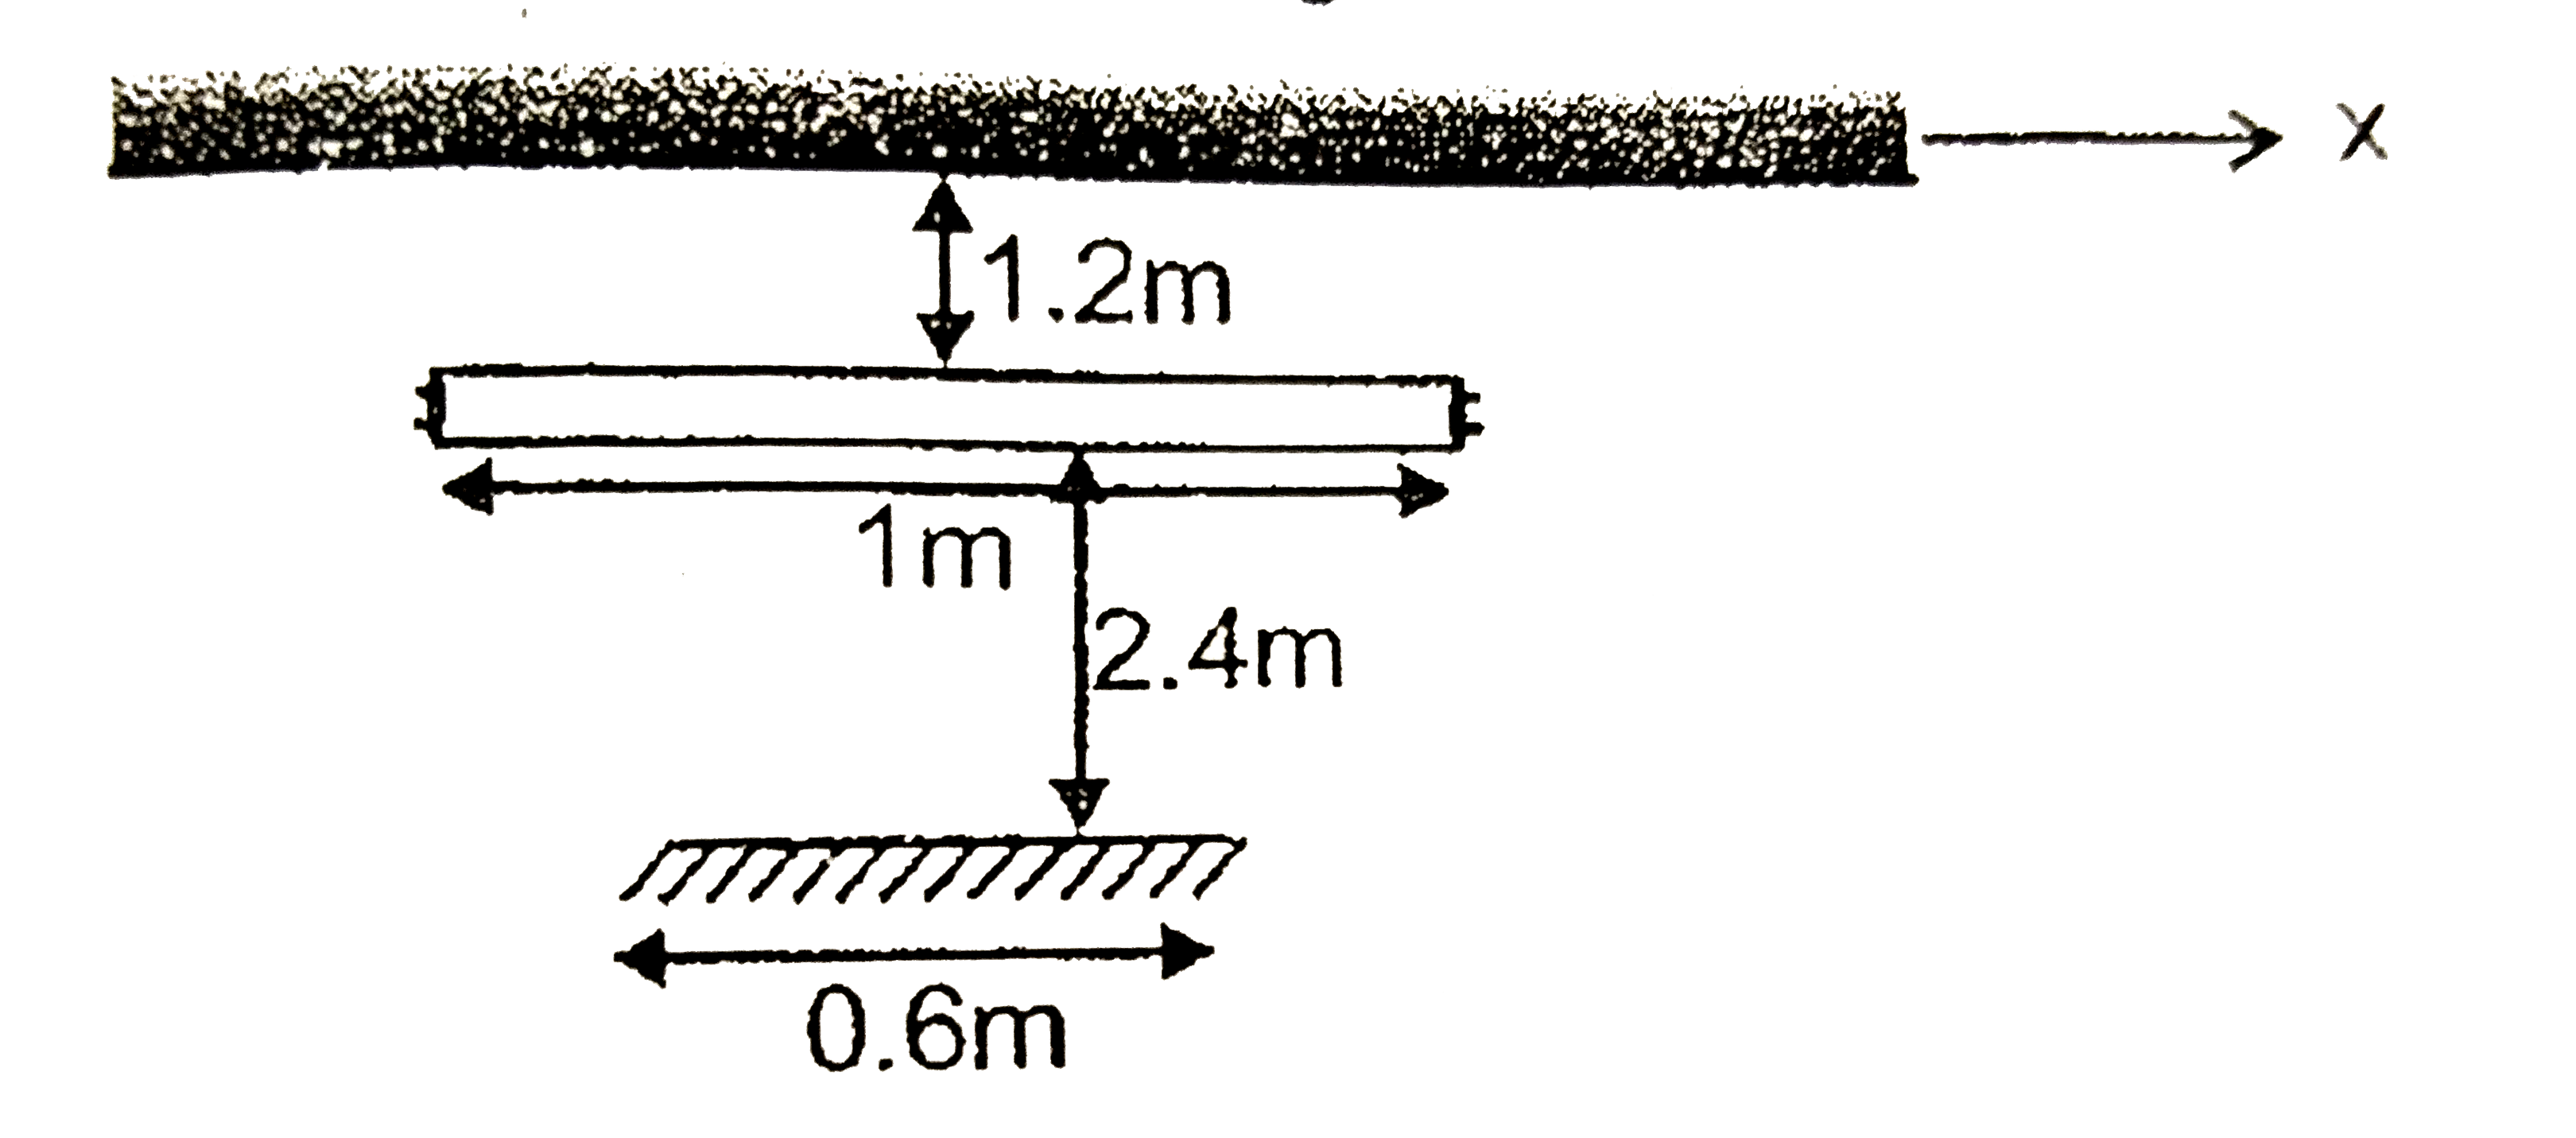 A fluorescent lamp of length 1m is placed horizontally at a depth of 1.2 m below a ceiling . A plane mirror of length 0.6 m is placed below the lamp parallel to and symmetric to the lamp at a distance 2.4 m from it as shown in figure. Find the length in meters (distance between the extreme points of the visible region along x-axis ) of the reflected patch of light on the ceiling.